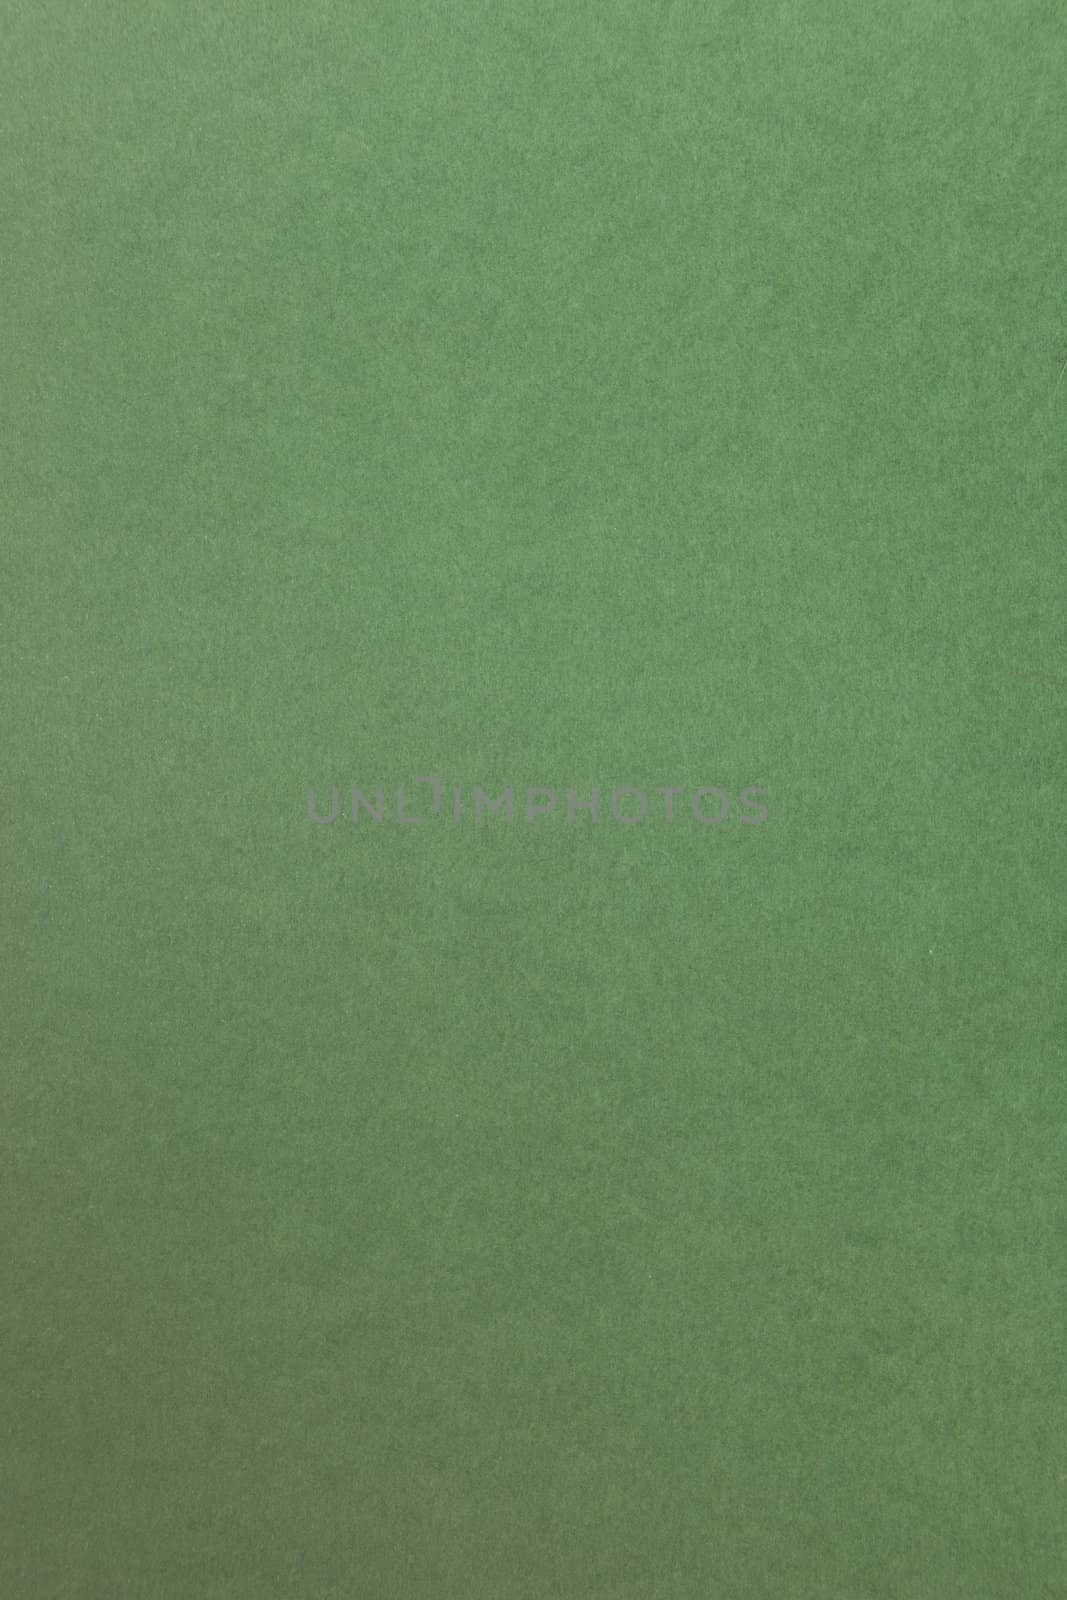 Fine green pastel paper texture for background